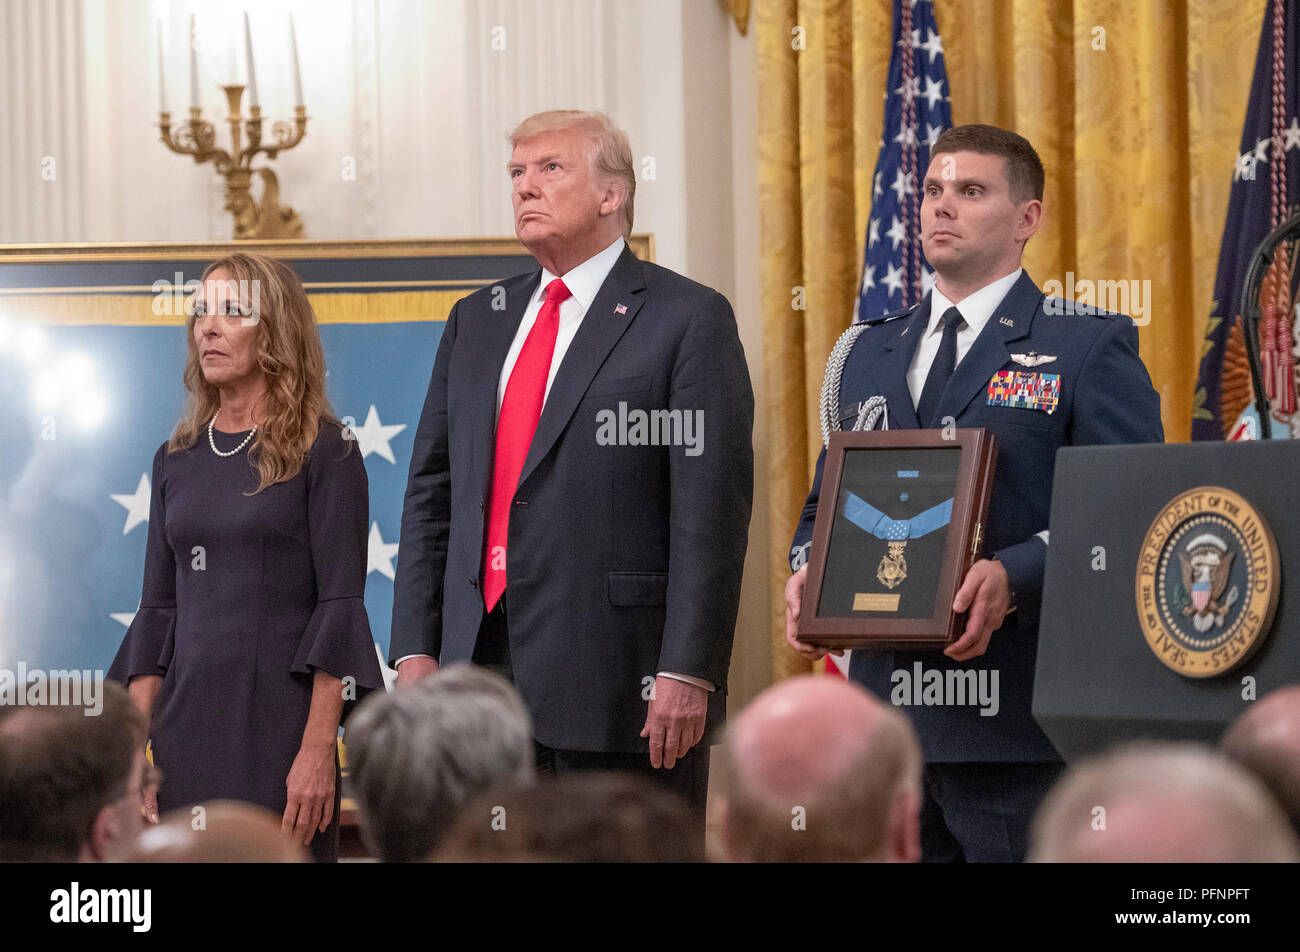 Valerie Nessel, widow of Technical Sergeant John A. Chapman, United States Air Force, left, stands with US President Donald J. Trump, center, makes remarks as she accepts the Medal of Honor posthumously from the President during a ceremony in the East Room of the White House in Washington, DC on Wednesday, August 22, 2018. Sergeant Chapman is being honored for his actions on March 4, 2002, on Takur Ghar mountain in Afghanistan where he gave his life to save his teammates. Credit: Ron Sachs/CNP /MediaPunch Stock Photo